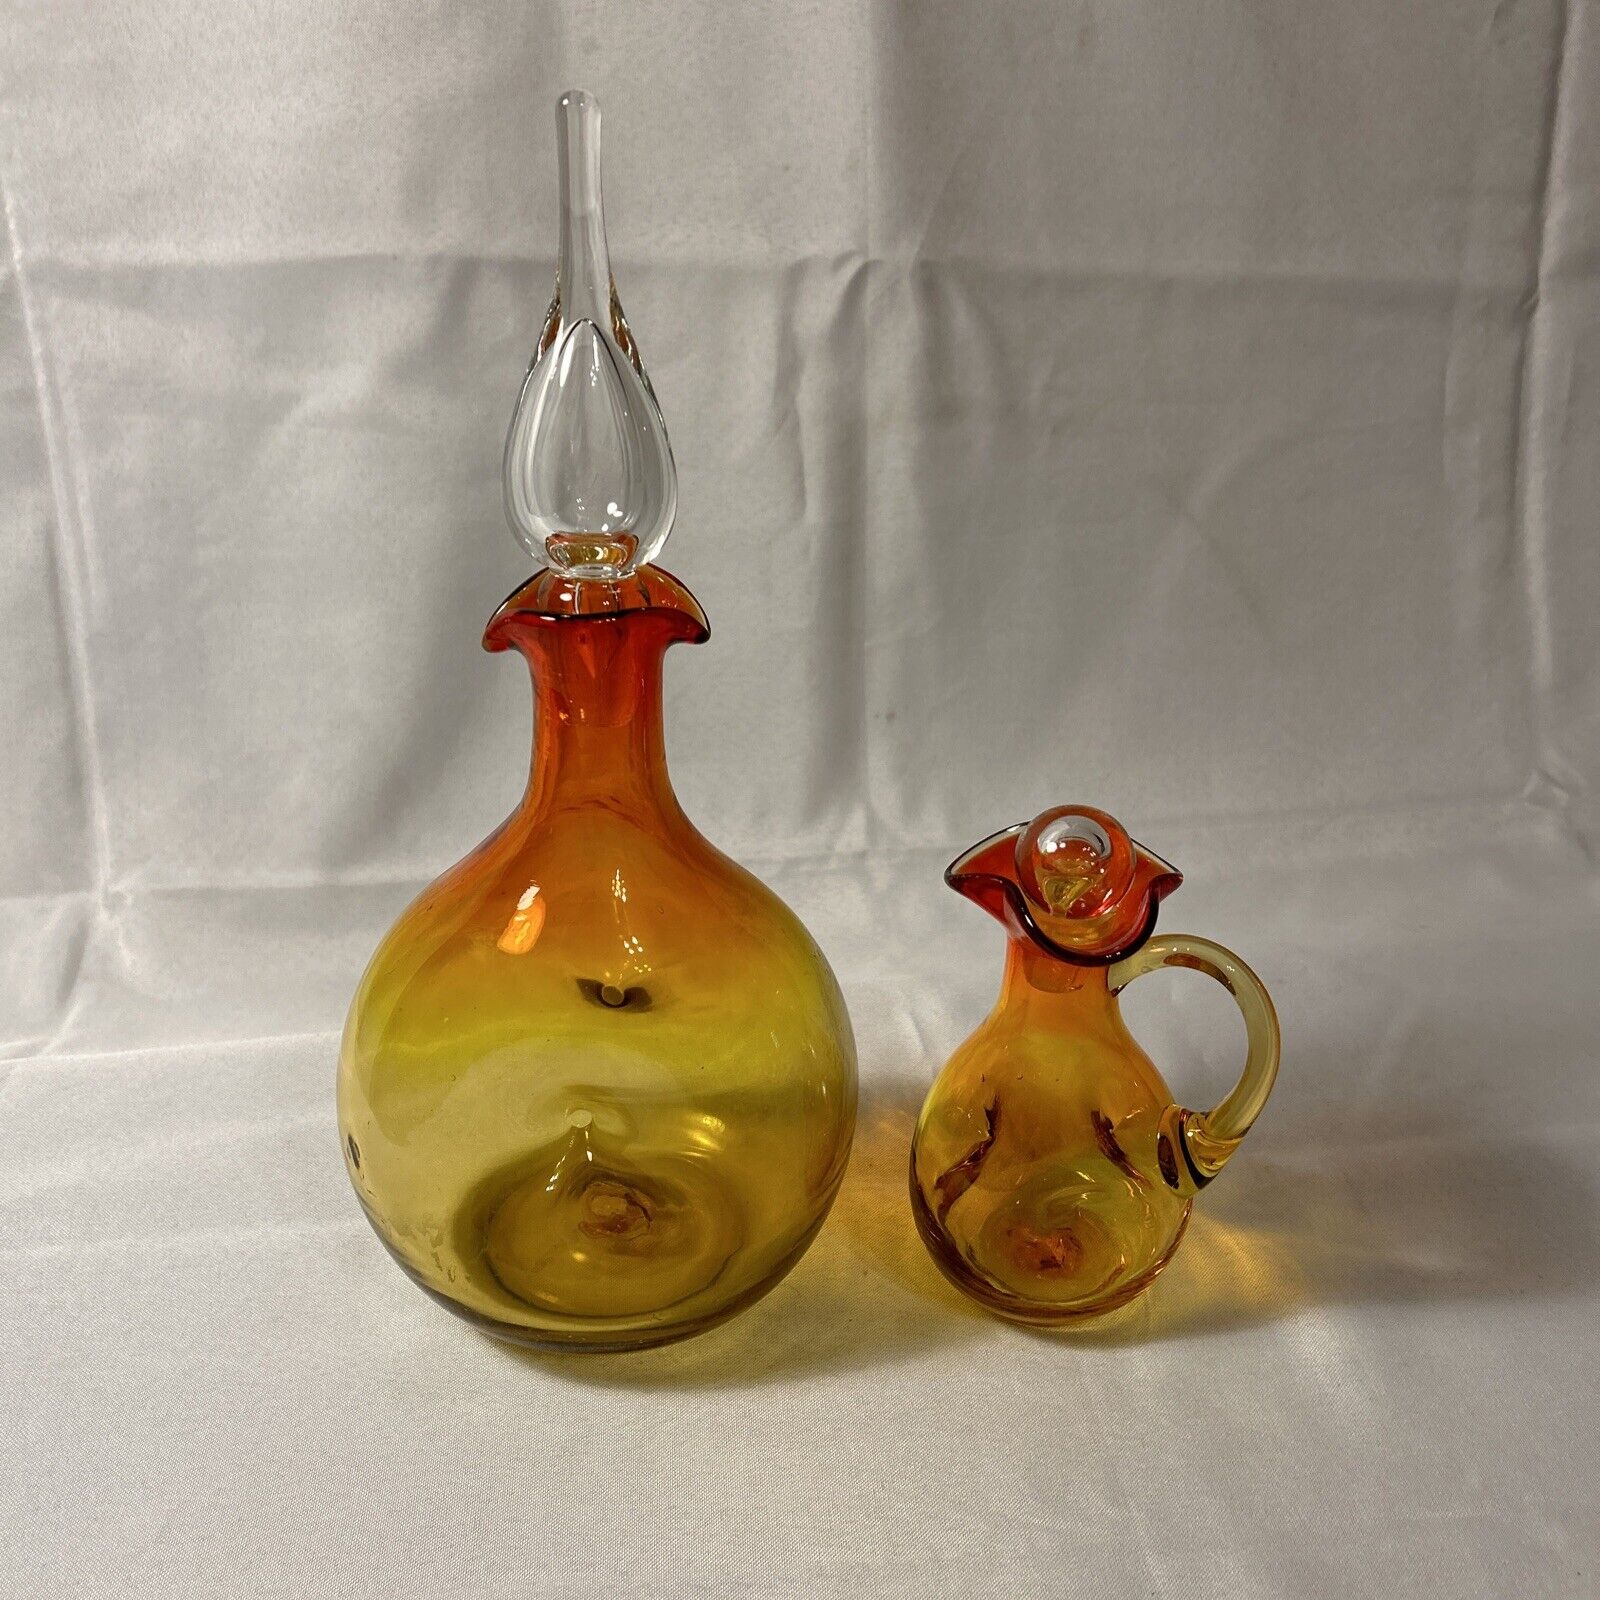 Antique Decanter Set Of 2 In Multi Sunburst Colors Uniquely Shaped With Stoppers